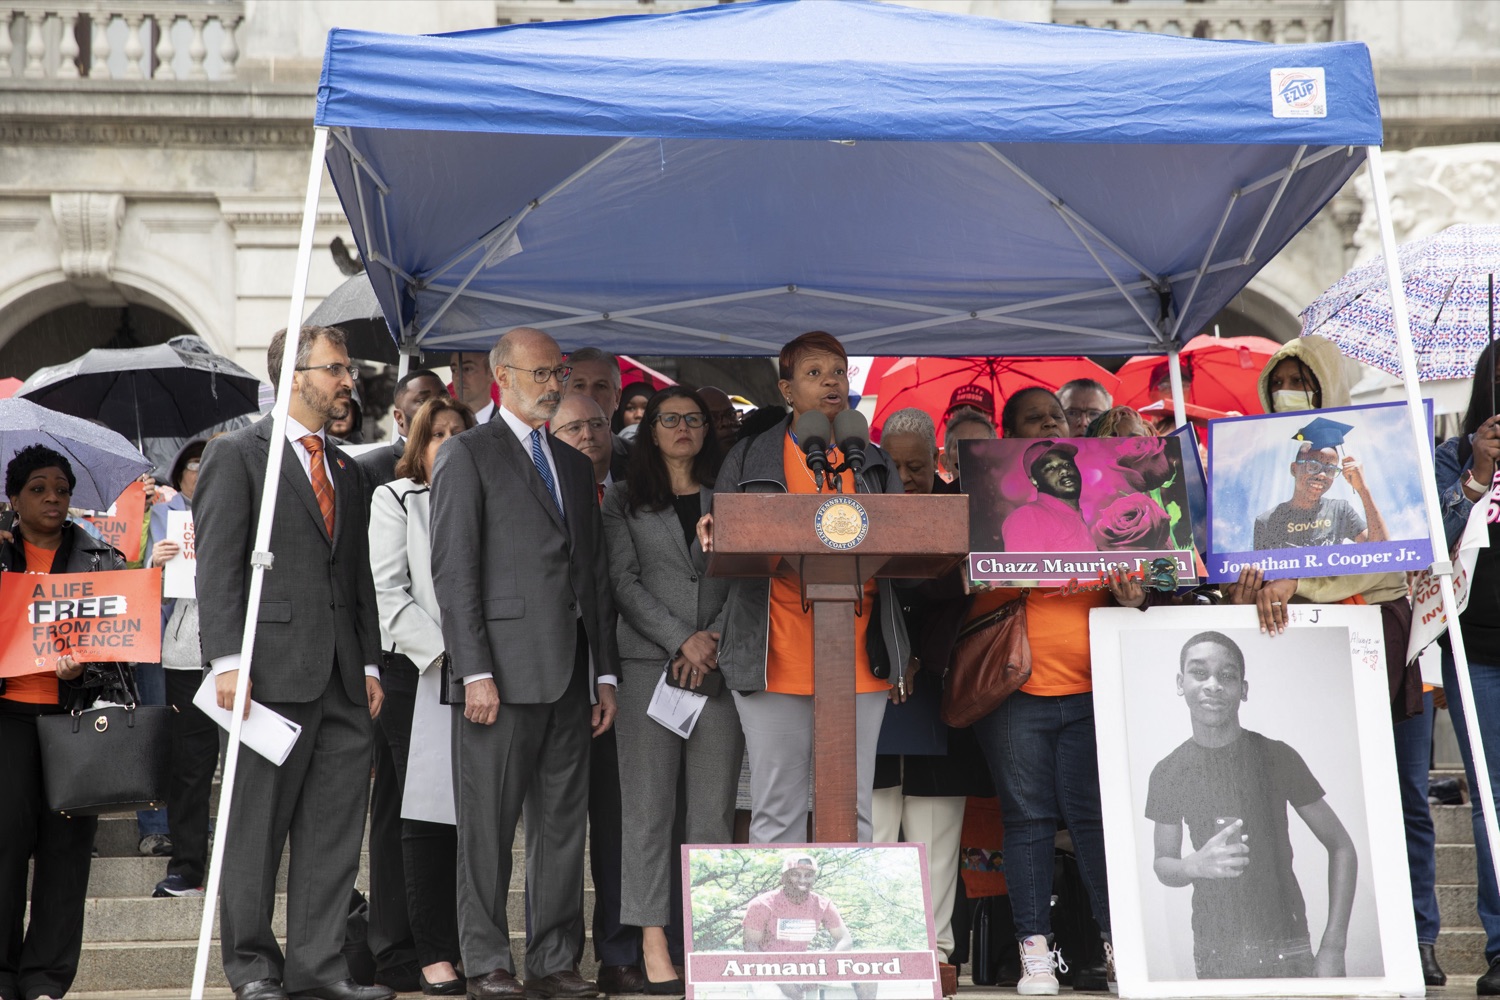 Tina Ford, Mother of Armani, who was lost to gun violence 3 years ago, calls for legislative action to save lives against gun violence, in Harrisburg, PA on April 26, 2022.<br><a href="https://filesource.amperwave.net/commonwealthofpa/photo/20782_gov_ceaseFirePA_05.JPG" target="_blank">⇣ Download Photo</a>